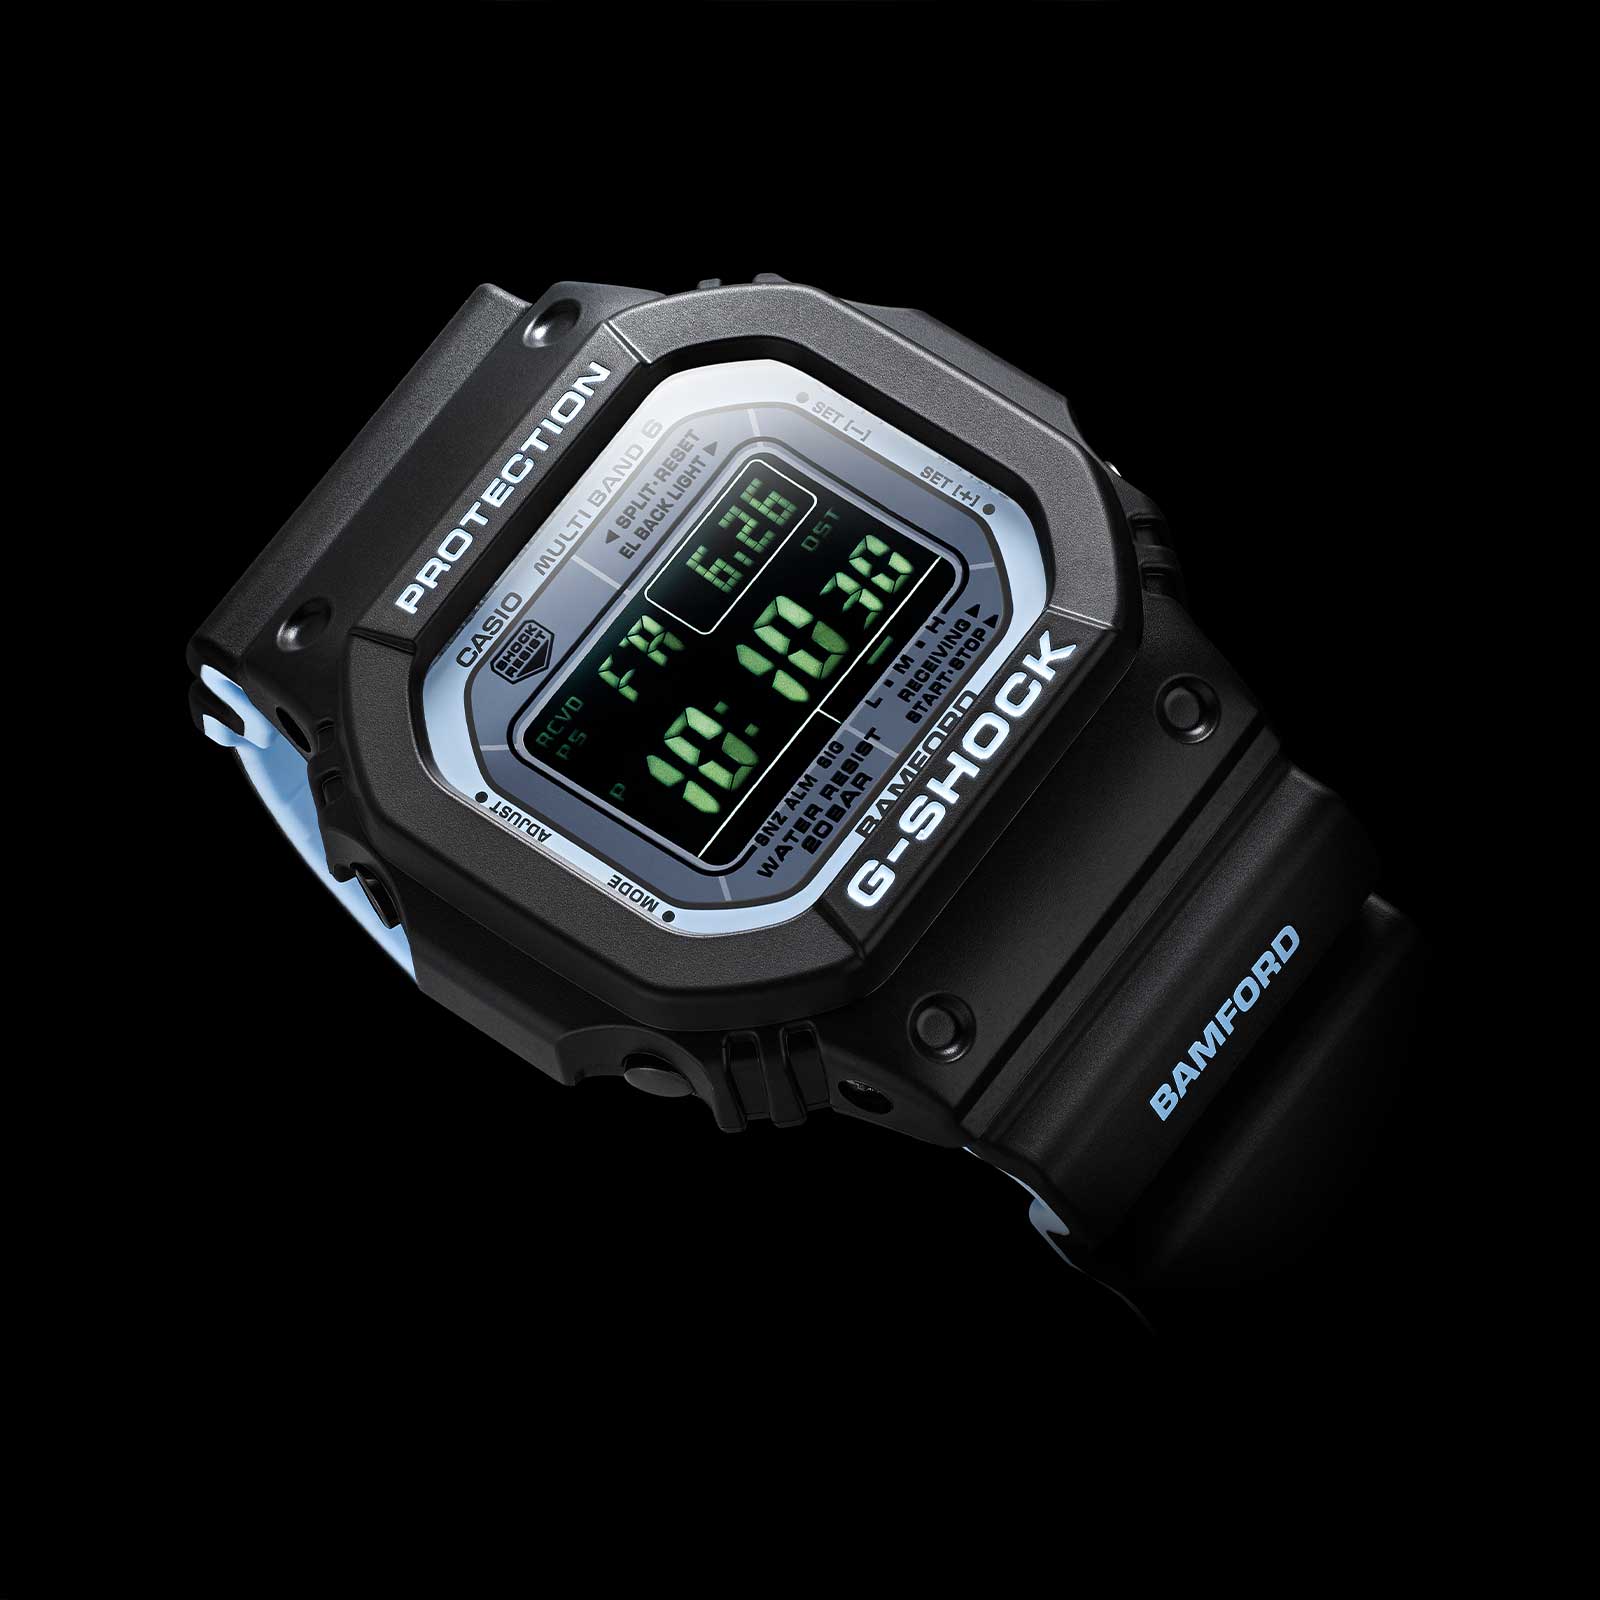 The baby blue and black Bamford G-SHOCK 5610 sold out in 6 minutes, which sucks, because it’s great